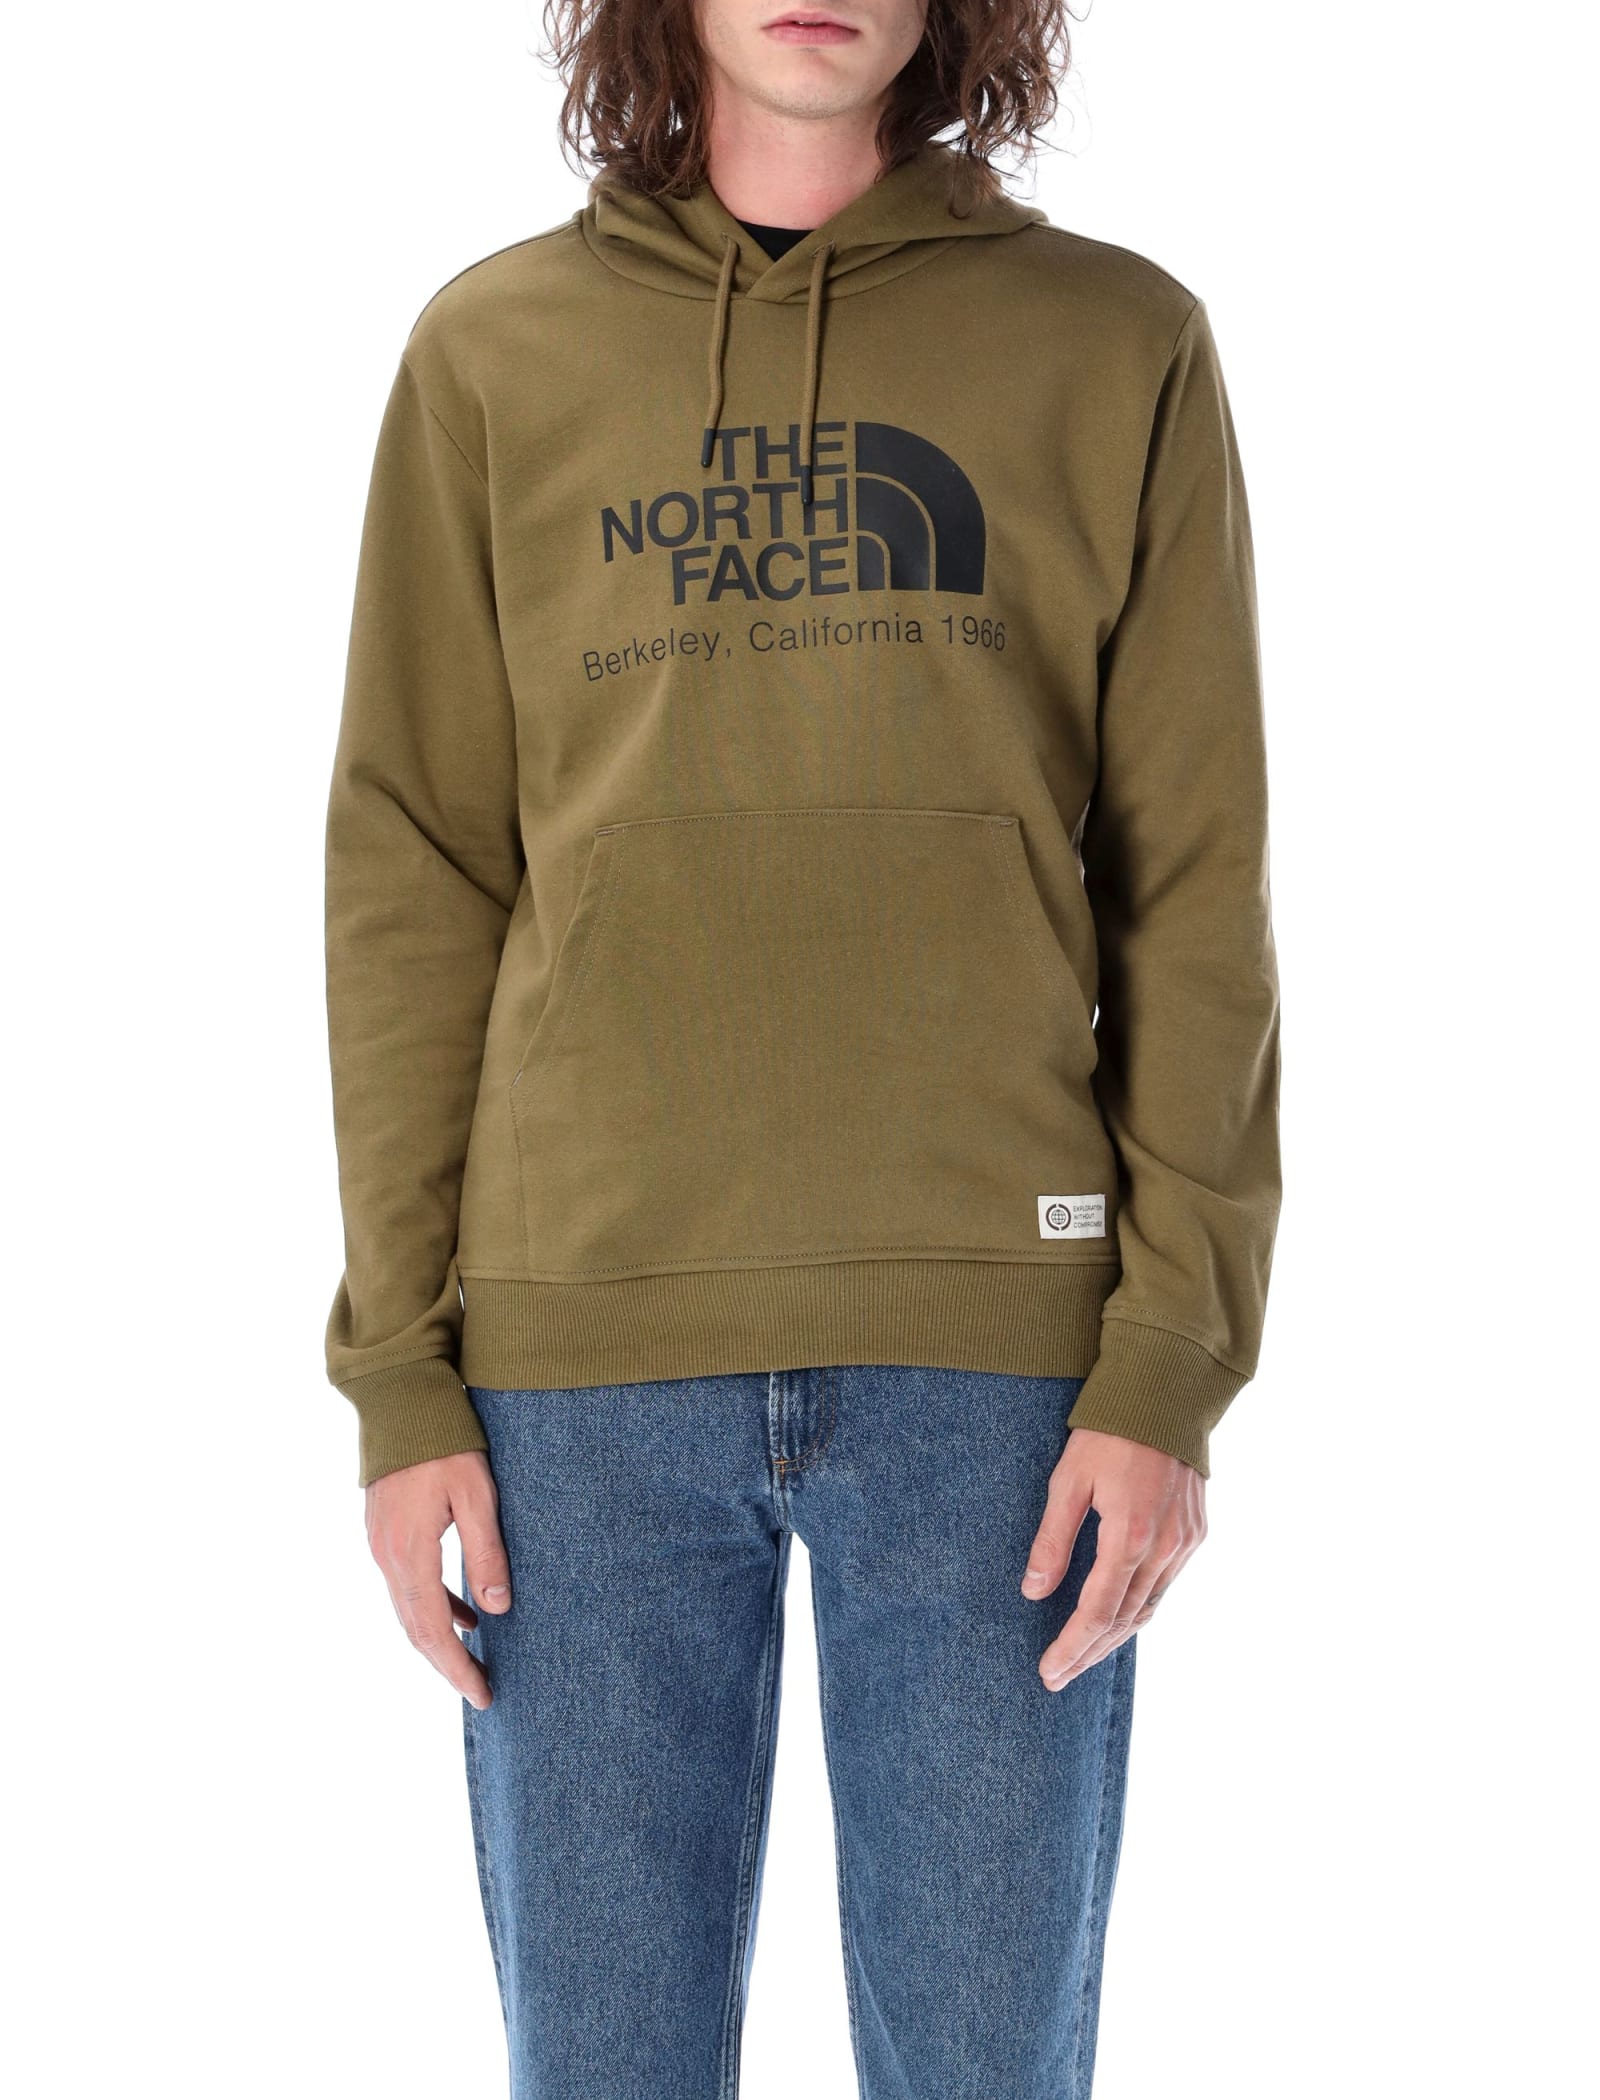 The North Face Barkeley Ca Hoodie